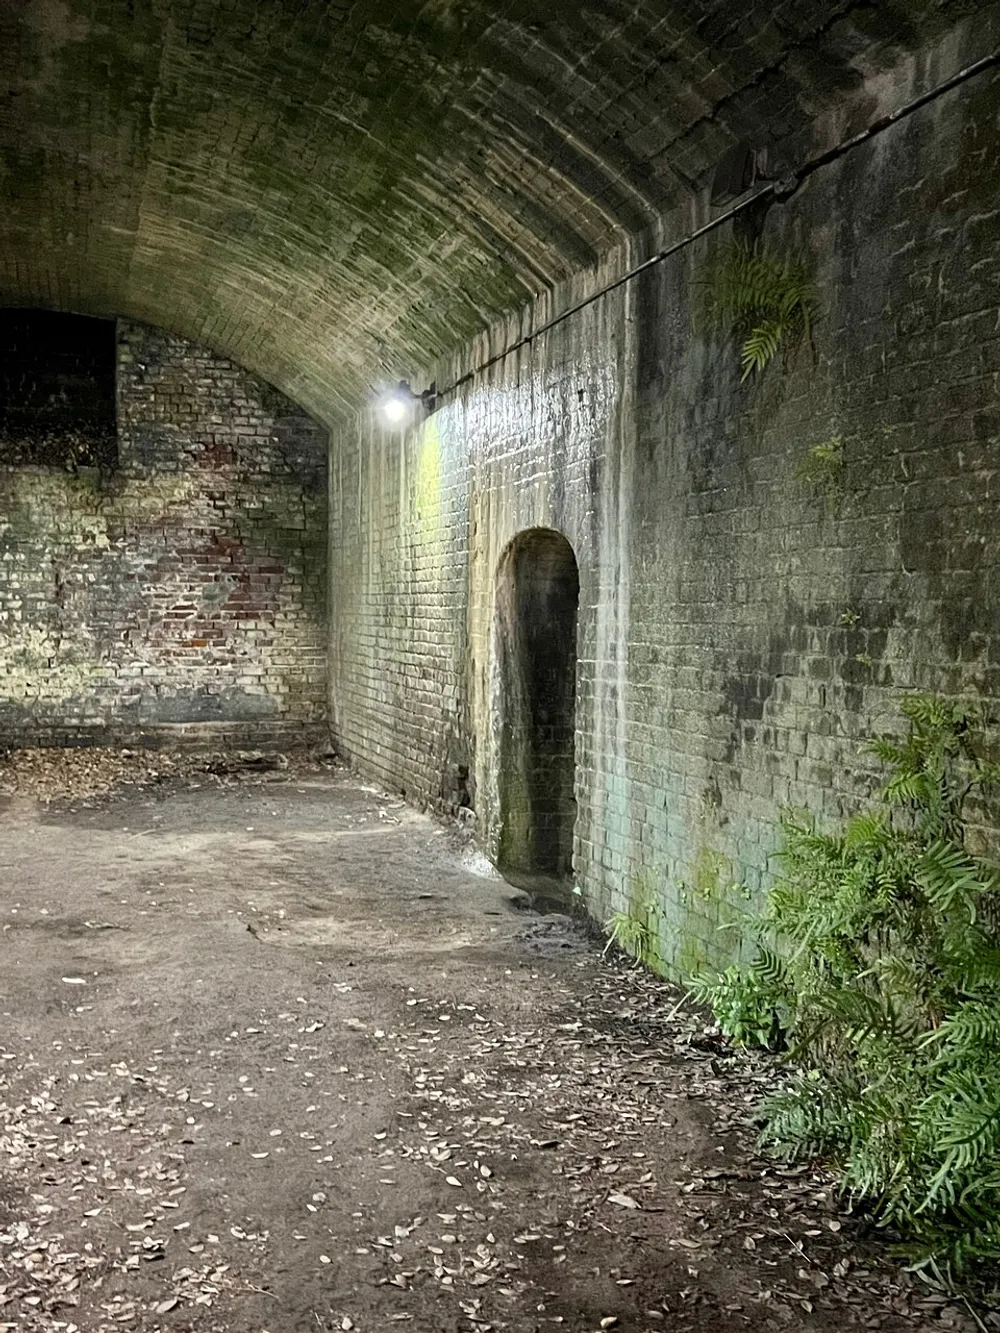 The image shows a dimly lit tunnel with a curved ceiling an arched doorway on the right wall and some green foliage growing from the brickwork